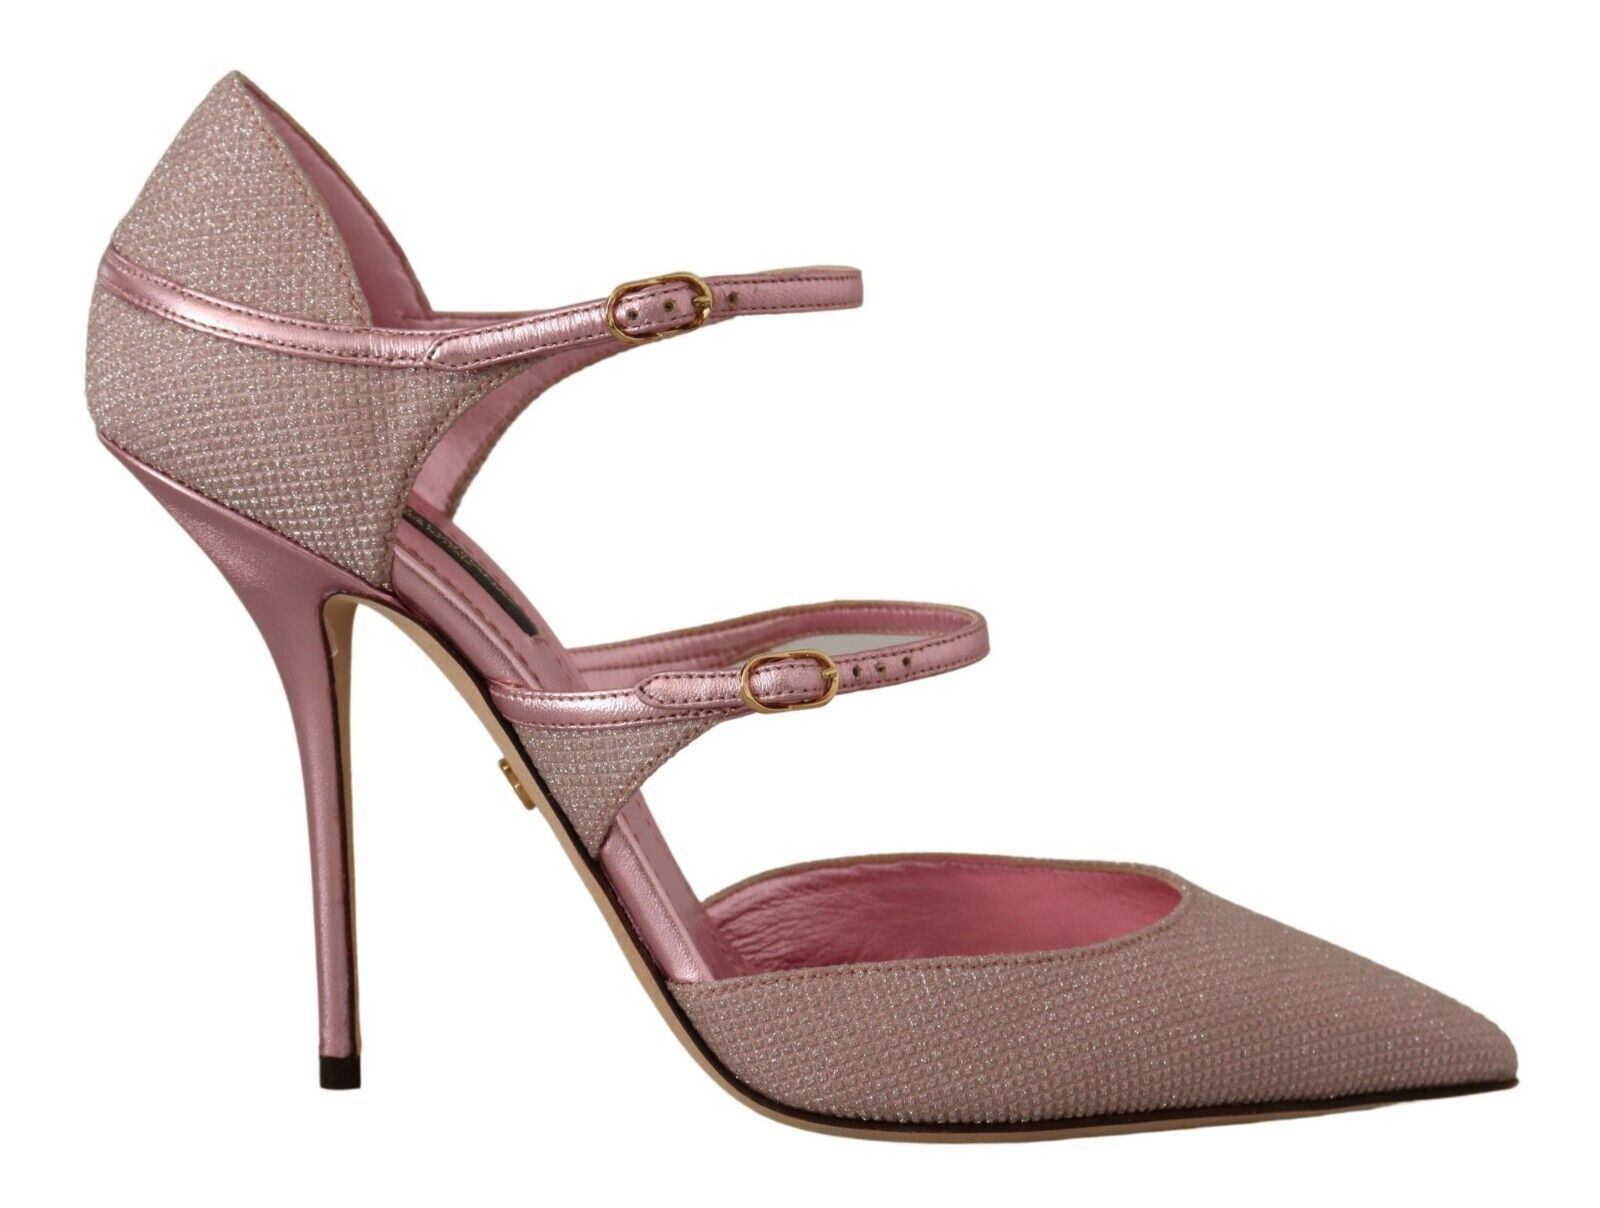 a pair of pink high heeled shoes